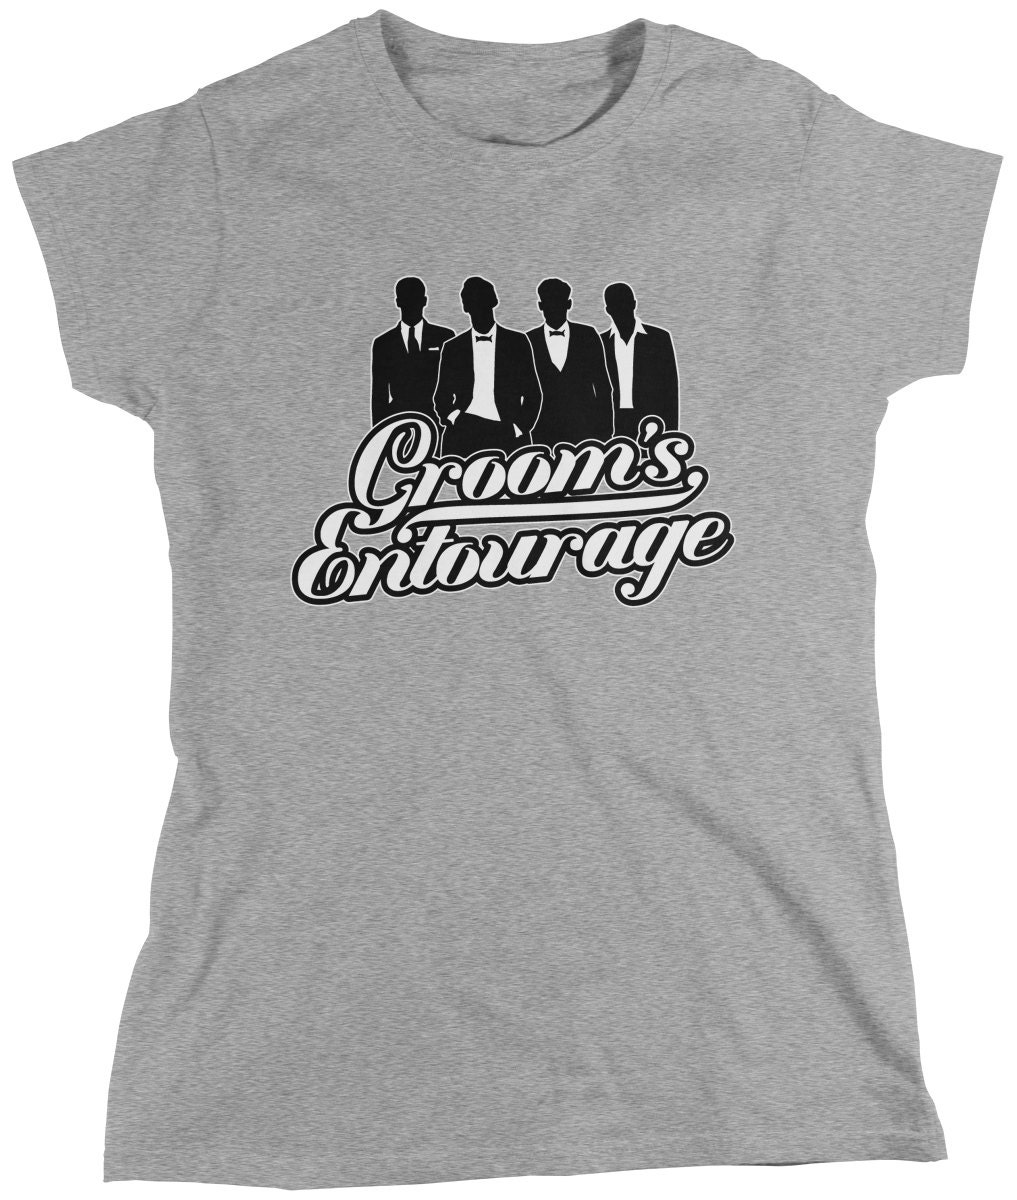 Friends Groomsmen Women's Wedding Shirts AMD_2029 Bachelor Party Family Grooms Entourage Ladie's T-Shirt Wedding Party